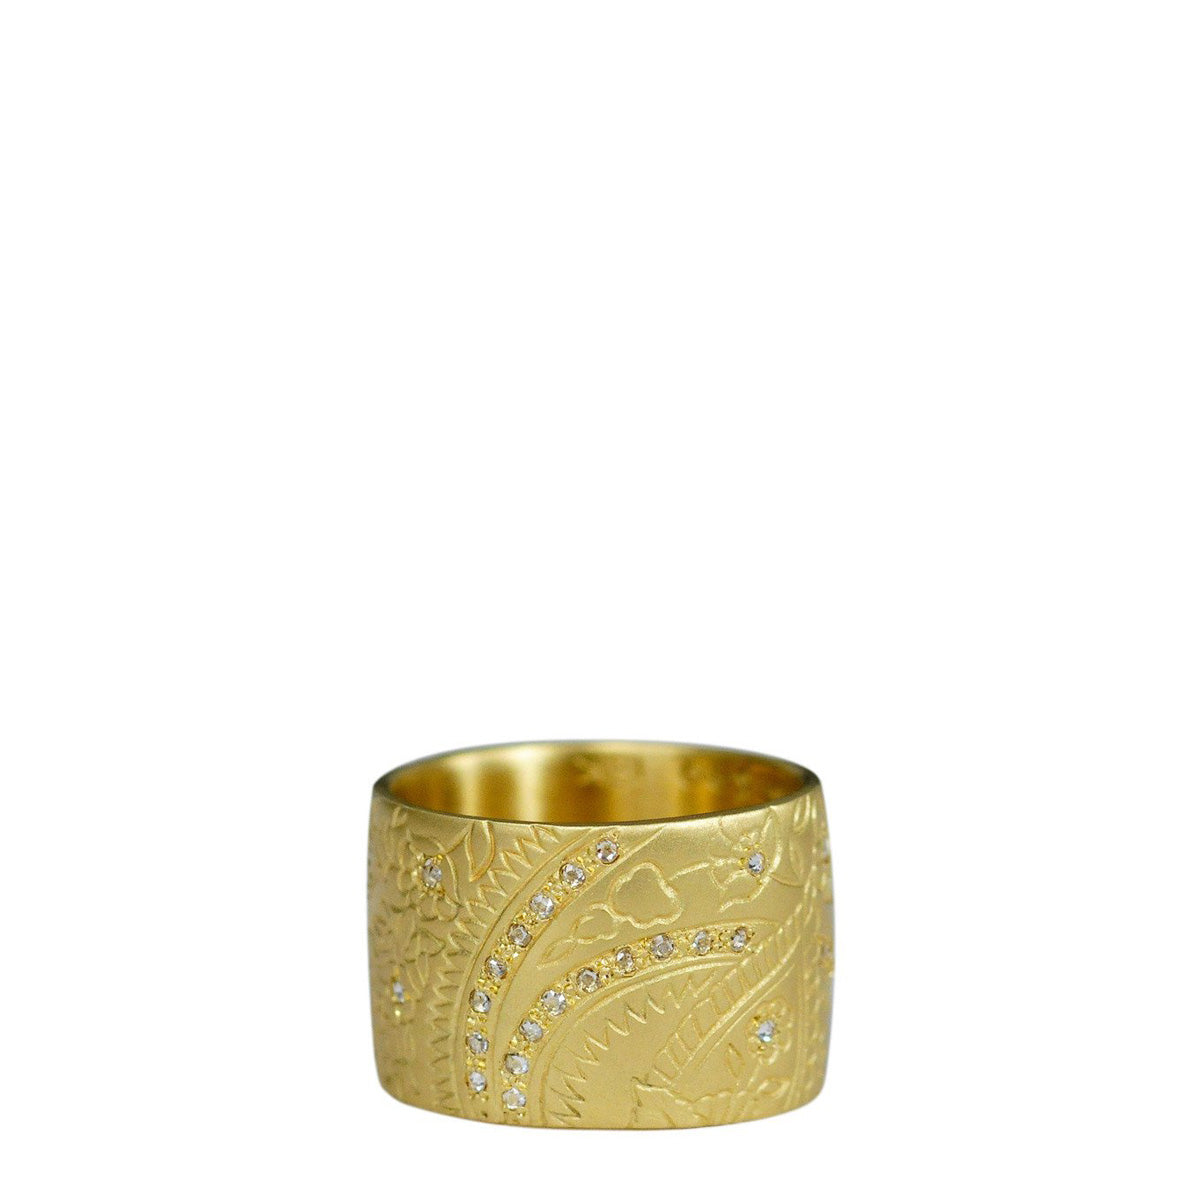 18K Gold Wide Engraved Paisley Band with Diamonds